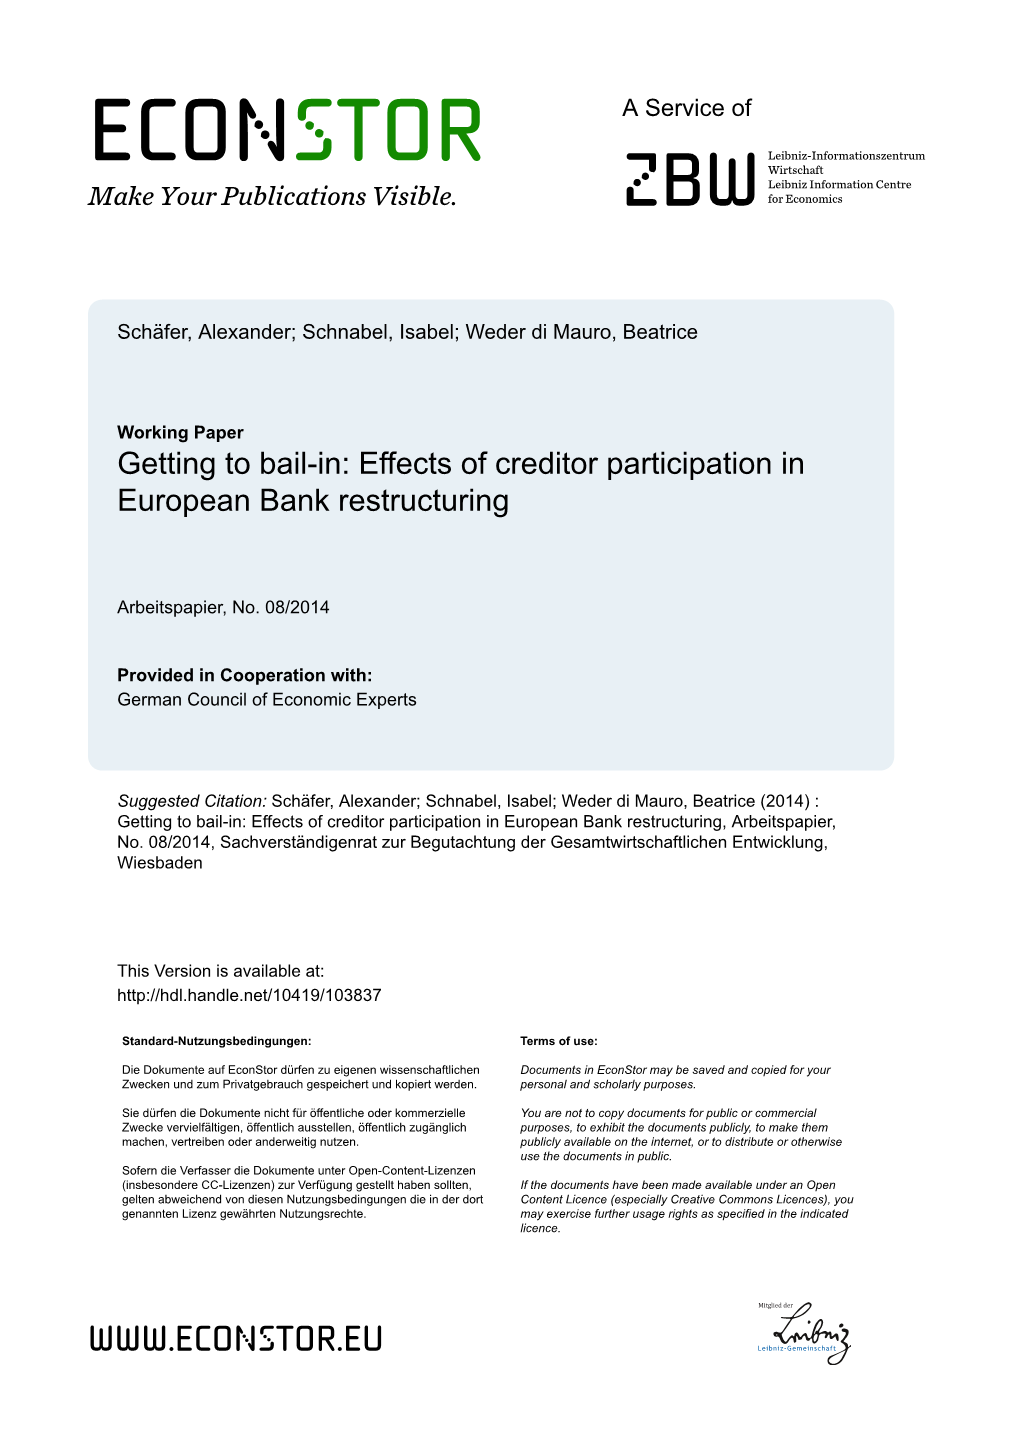 Getting to Bail-In: Effects of Creditor Participation in European Bank Restructuring